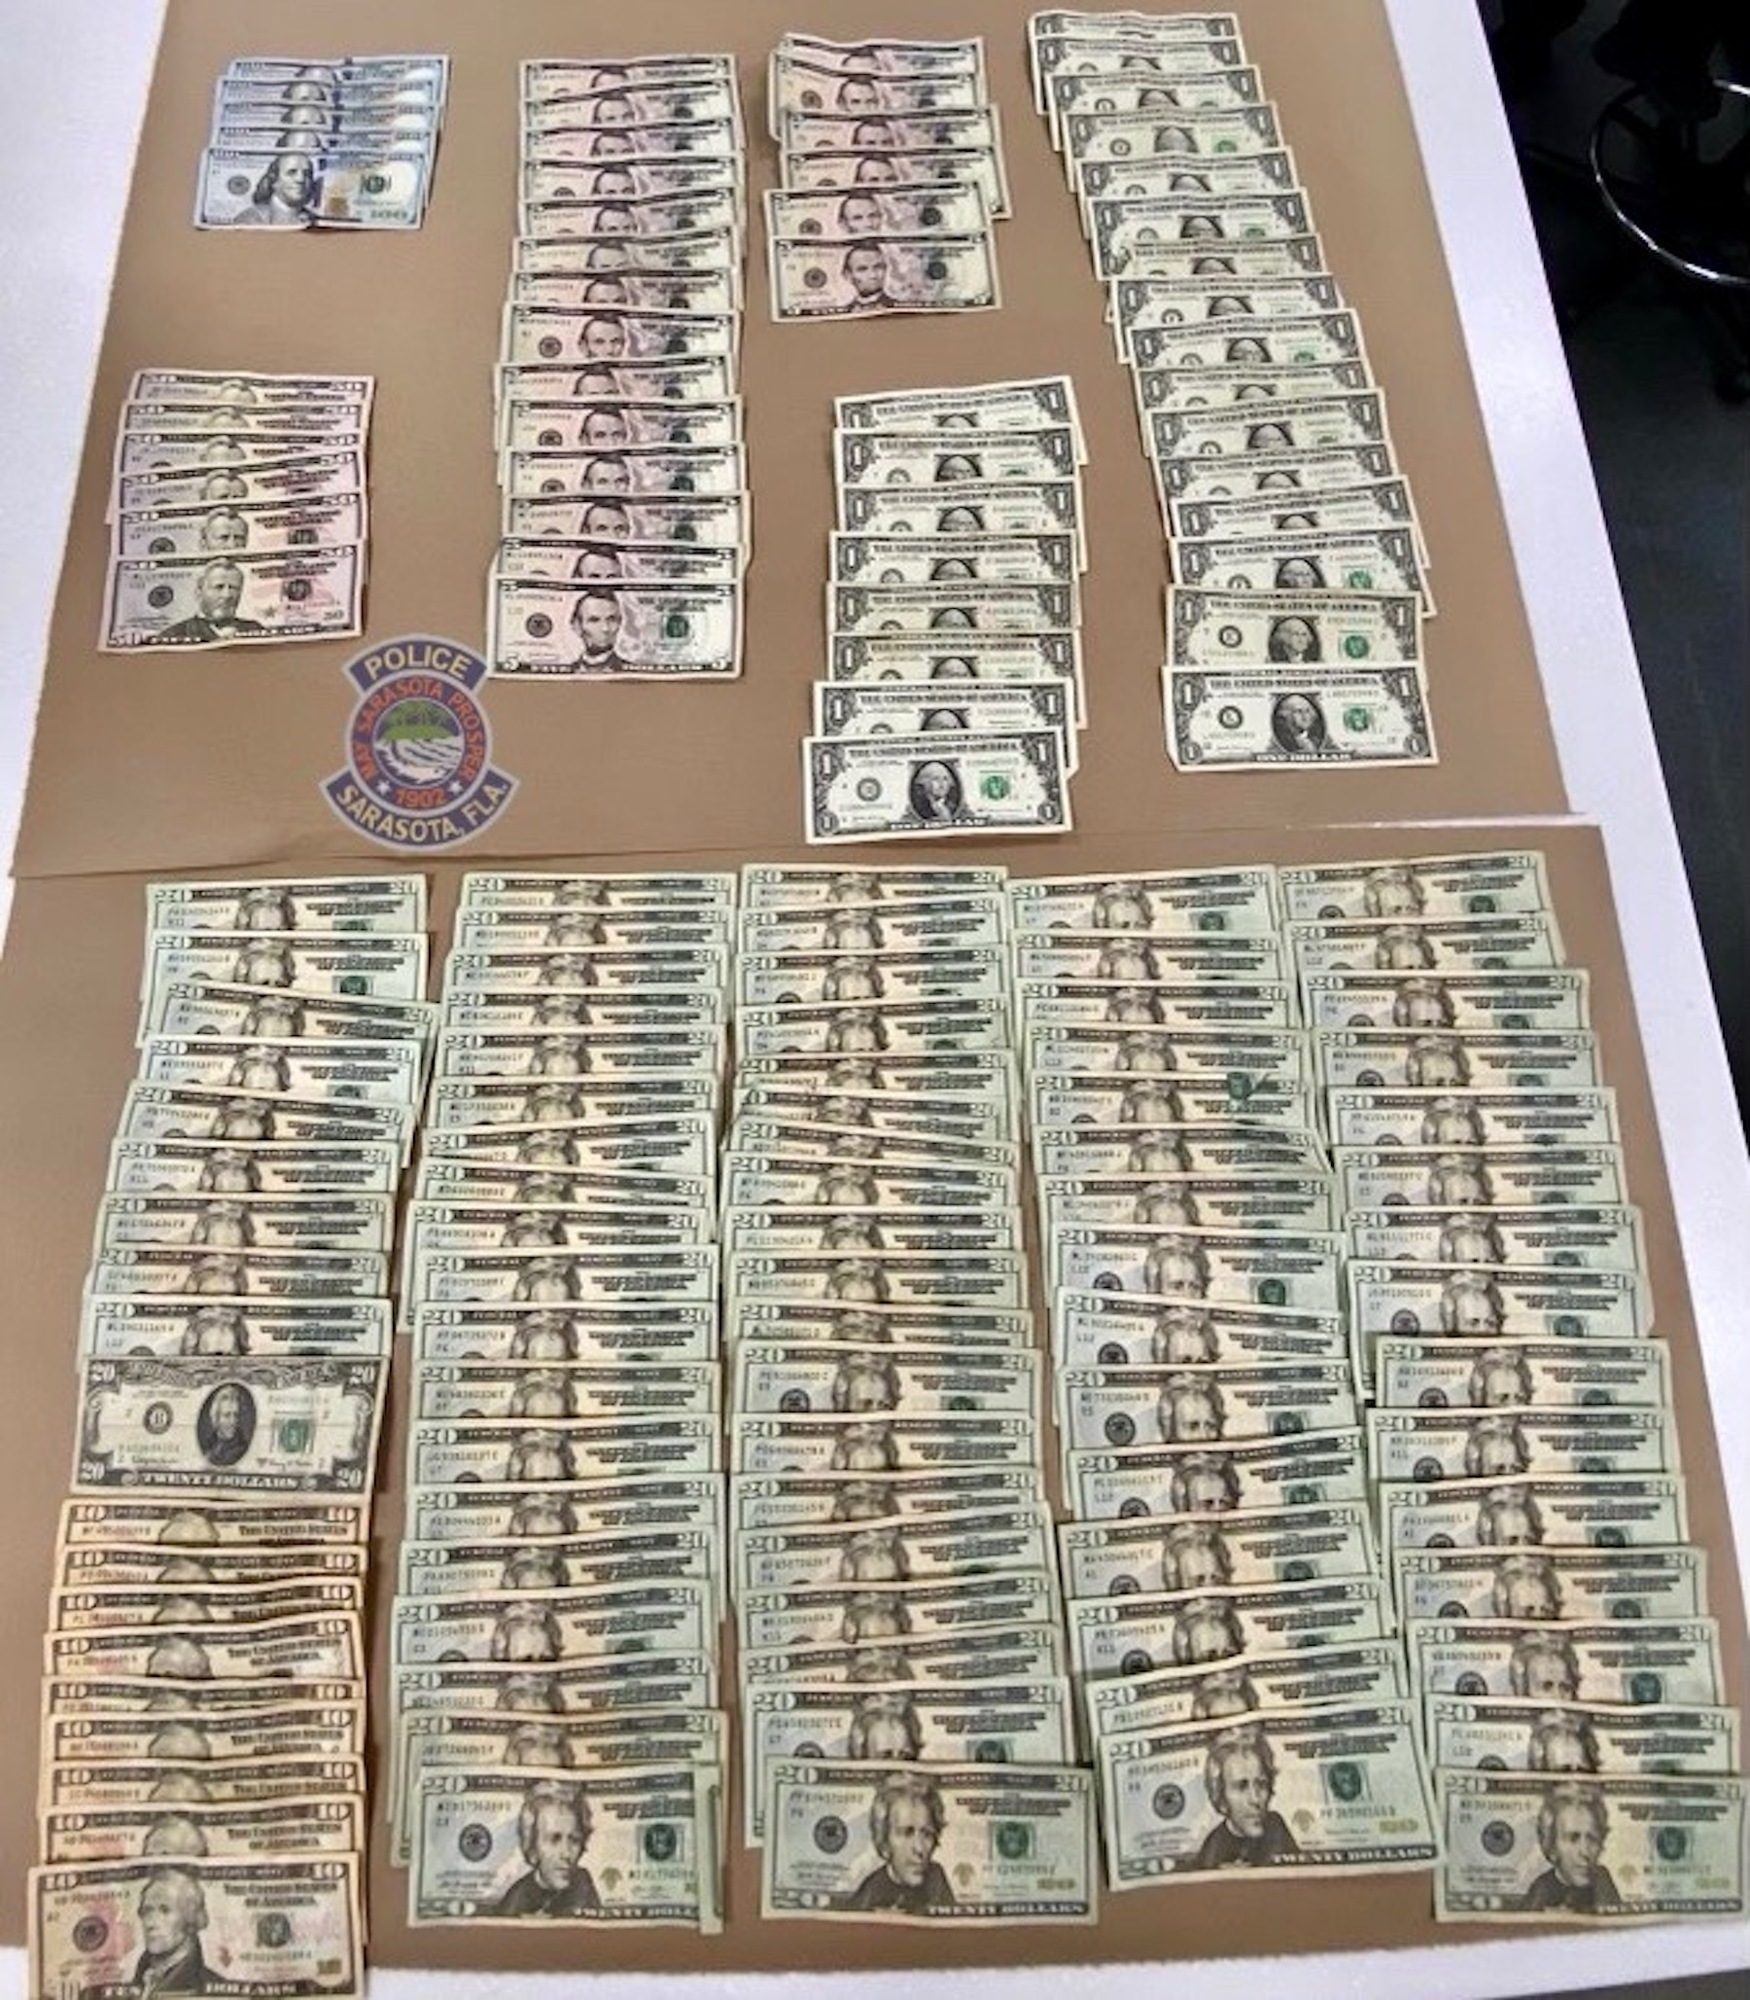 In addition to drugs and a weapon, SPD seized $2,701 in cash during last Friday's drug raid at a Sarasota home. (Courtesy Sarasota Police Department)